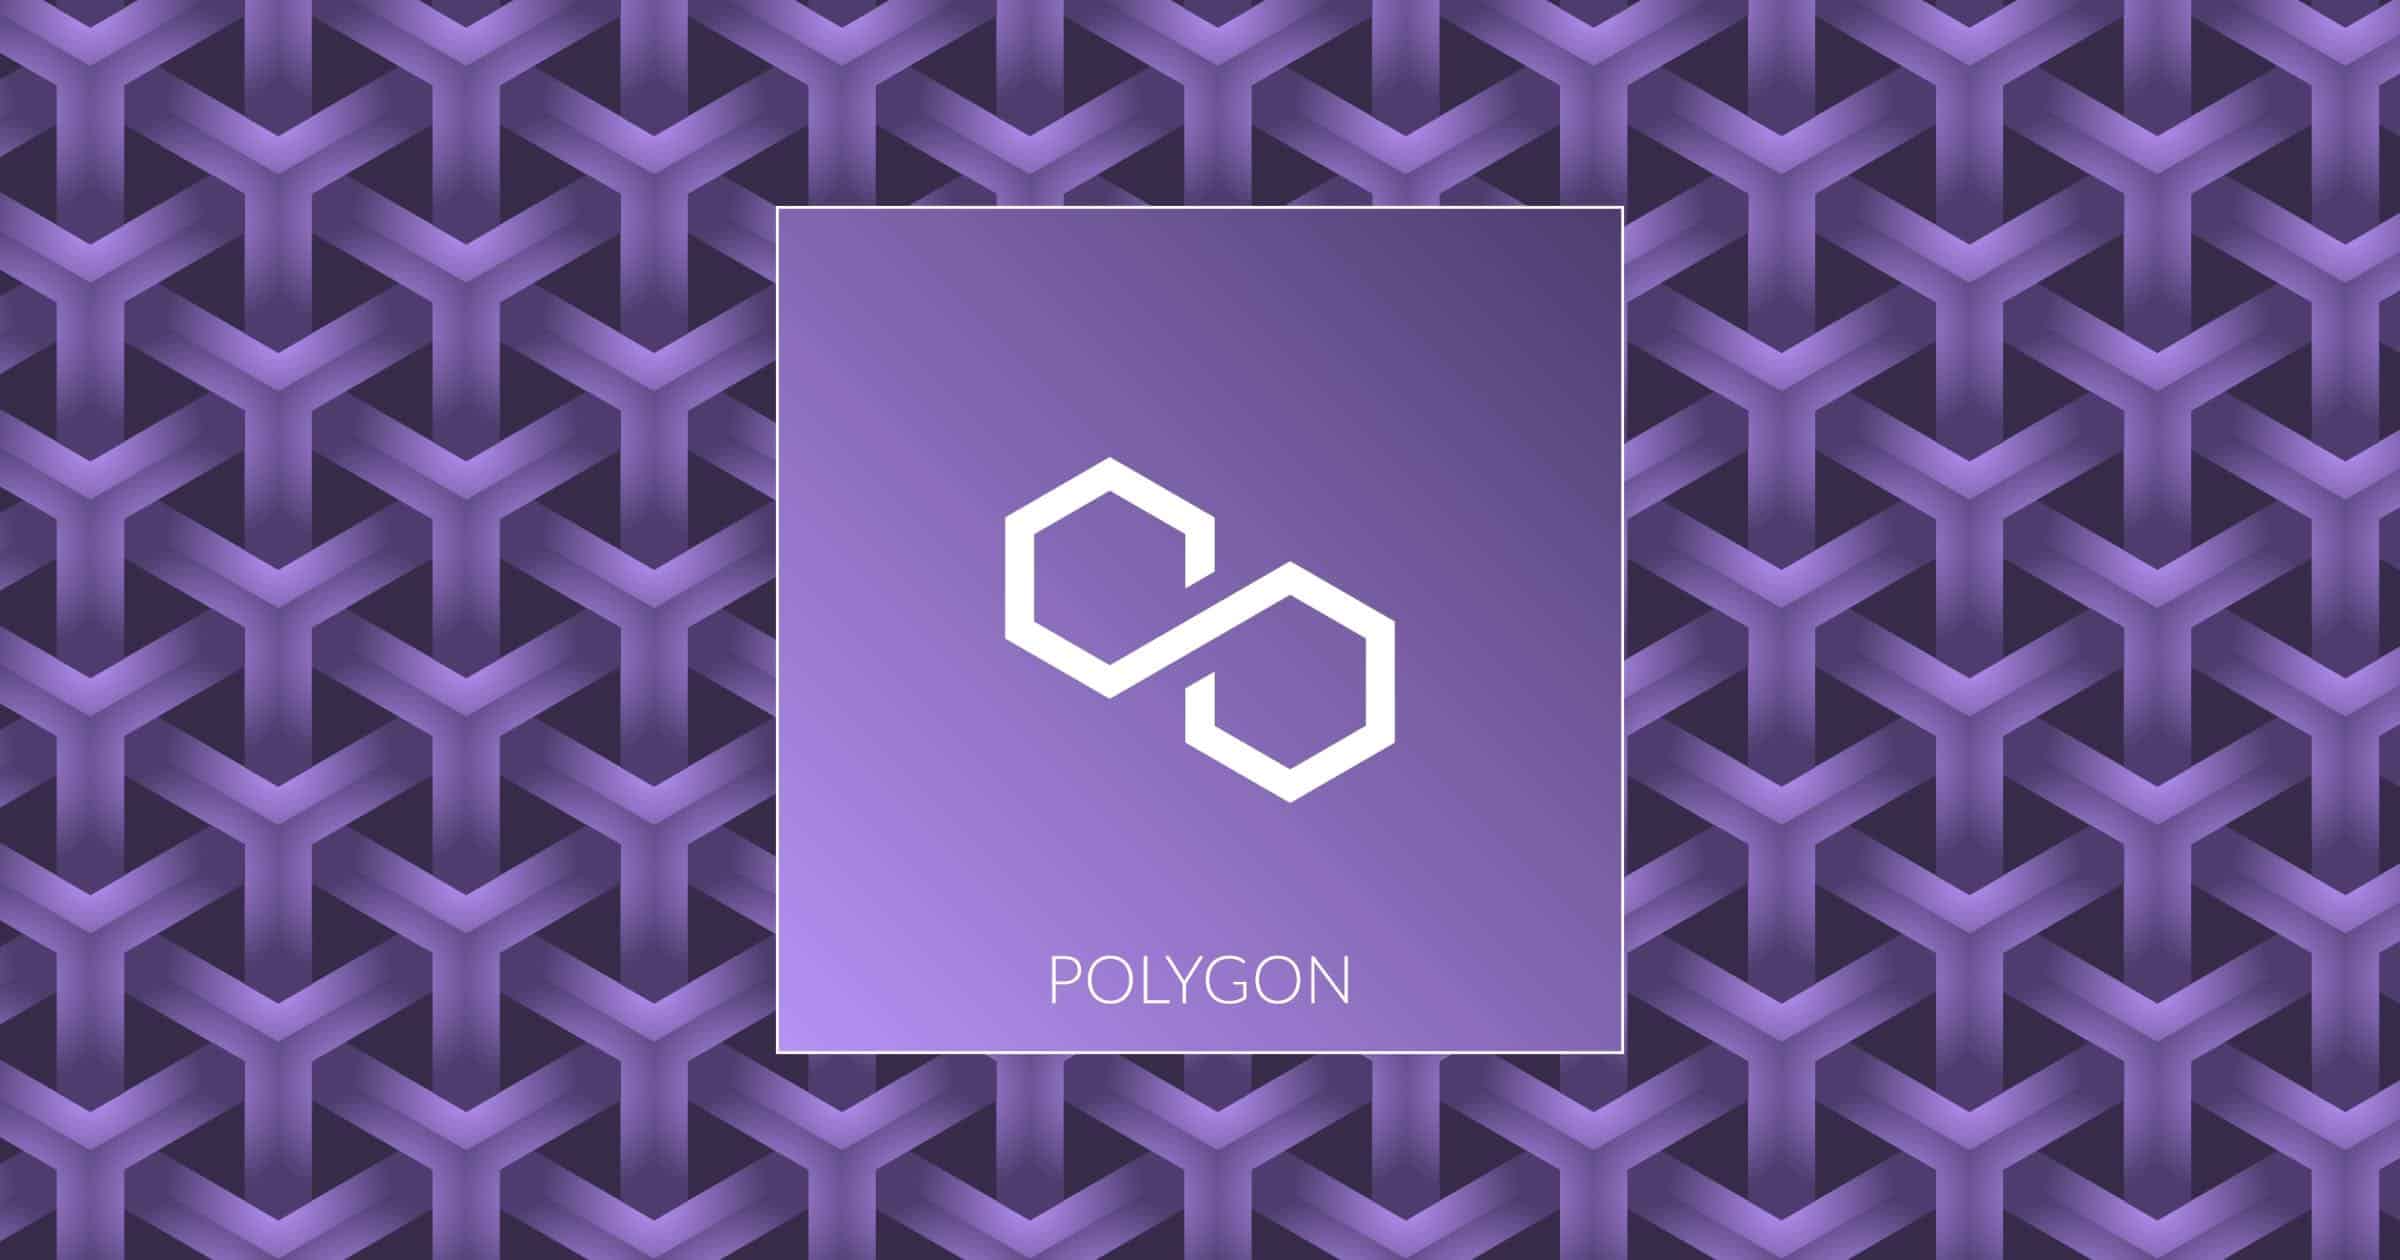 Ledger Adds Polygon (MATIC) Support in Ledger Live